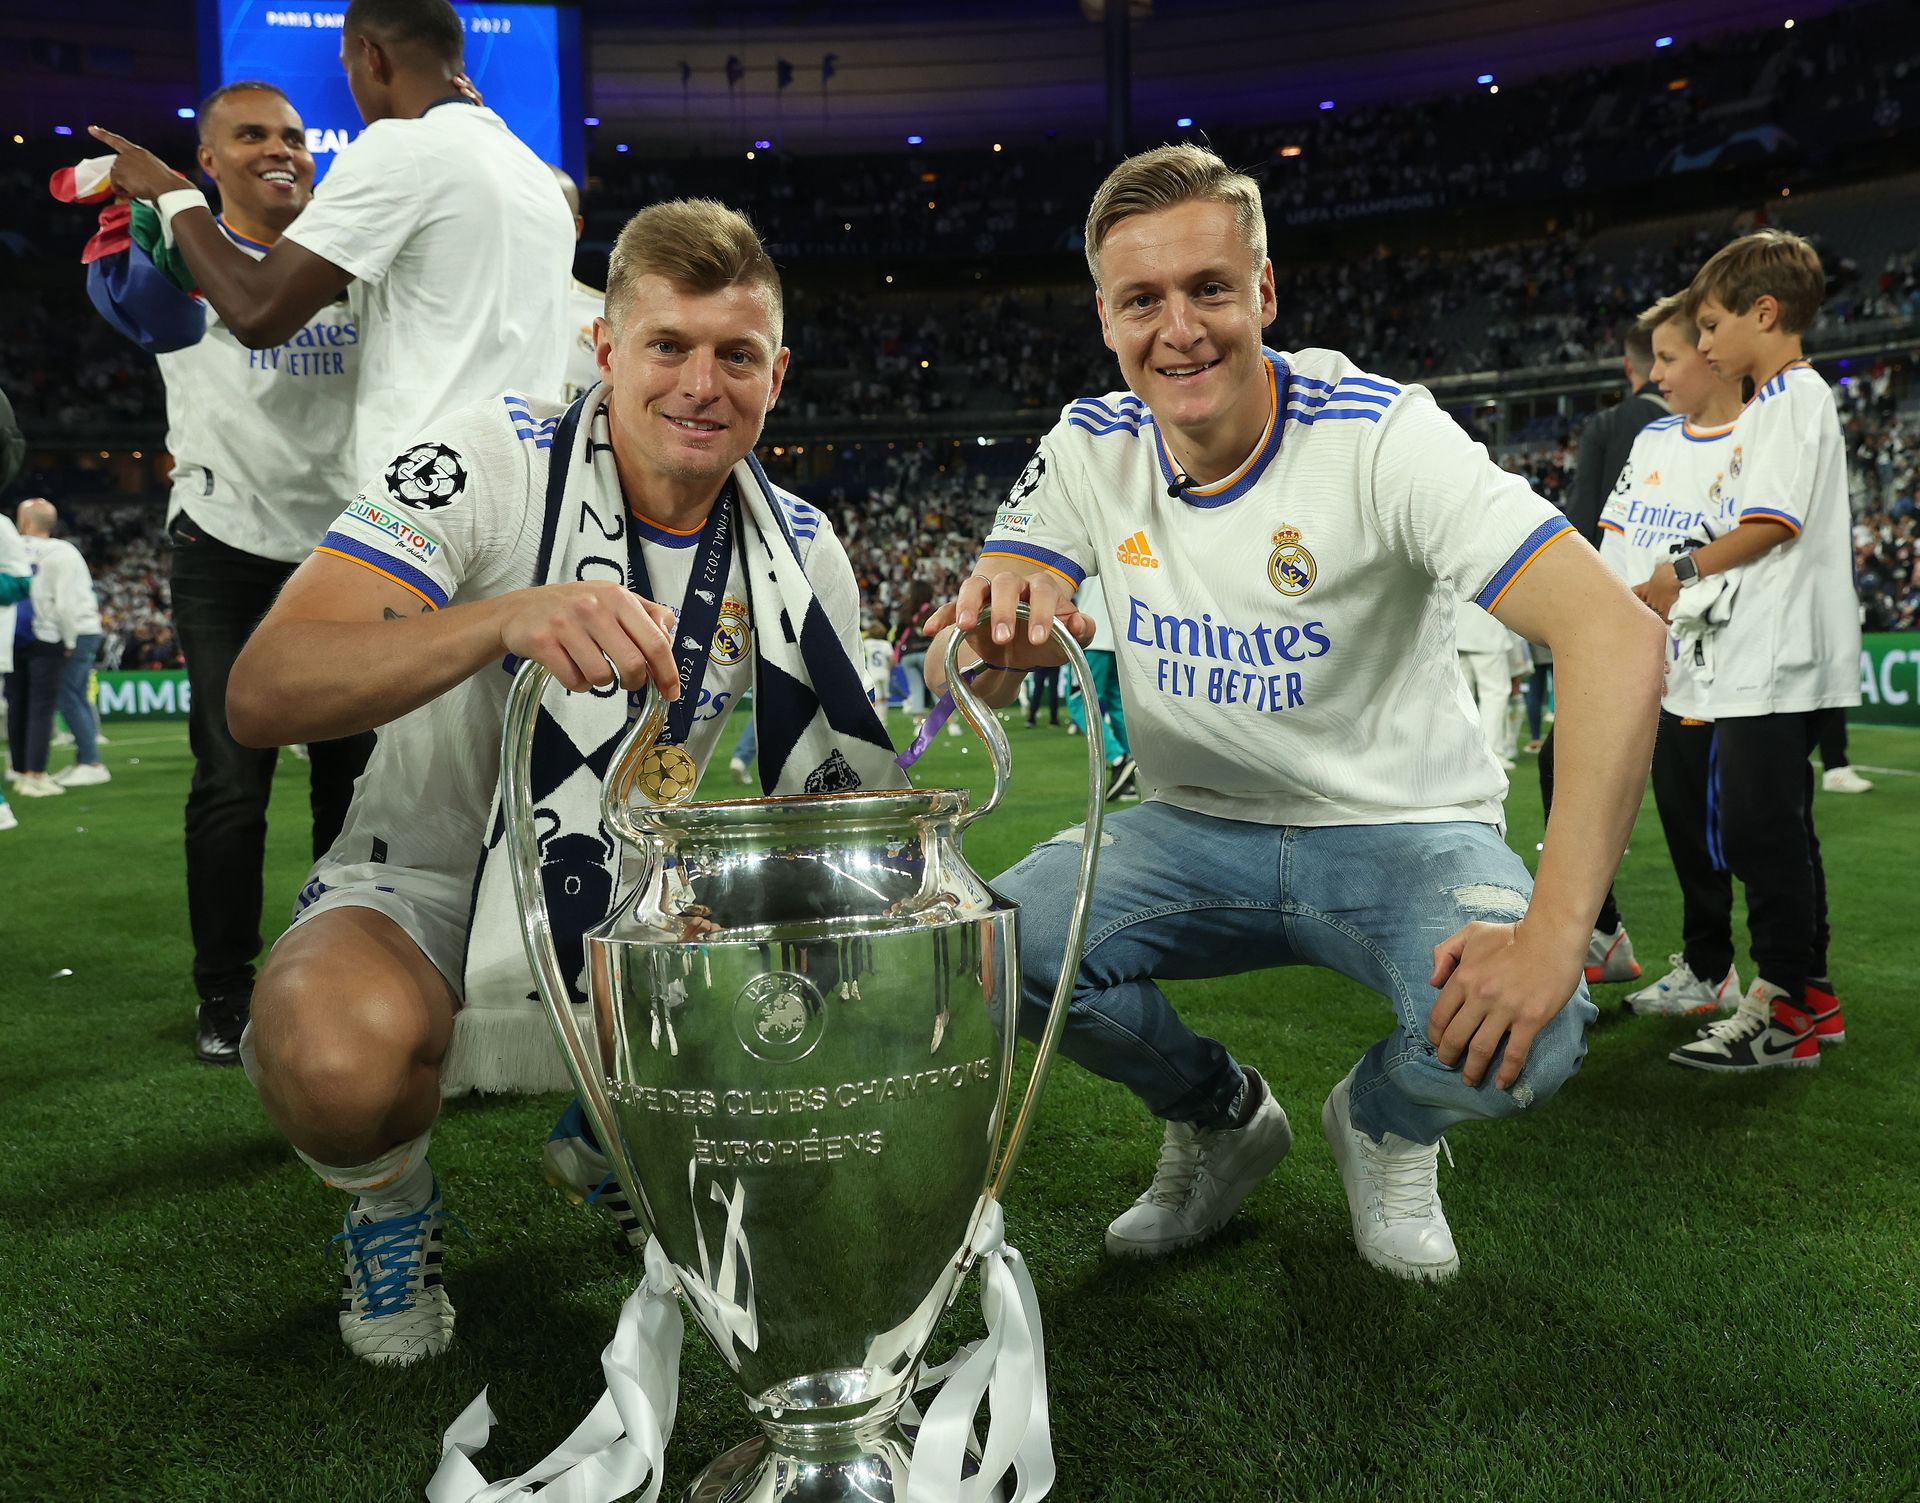 <p>                     Toni Kroos is one of the best midfielders ever, a World Cup winner with Germany and a multiple European champion for Real Madrid and Bayern Munich.                   </p>                                      <p>                     Brother Felix did not quite live up to those achievements, but represented Germany between Under-16 and U-21 level and played for Werder Bremen in the Bundesliga.                   </p>